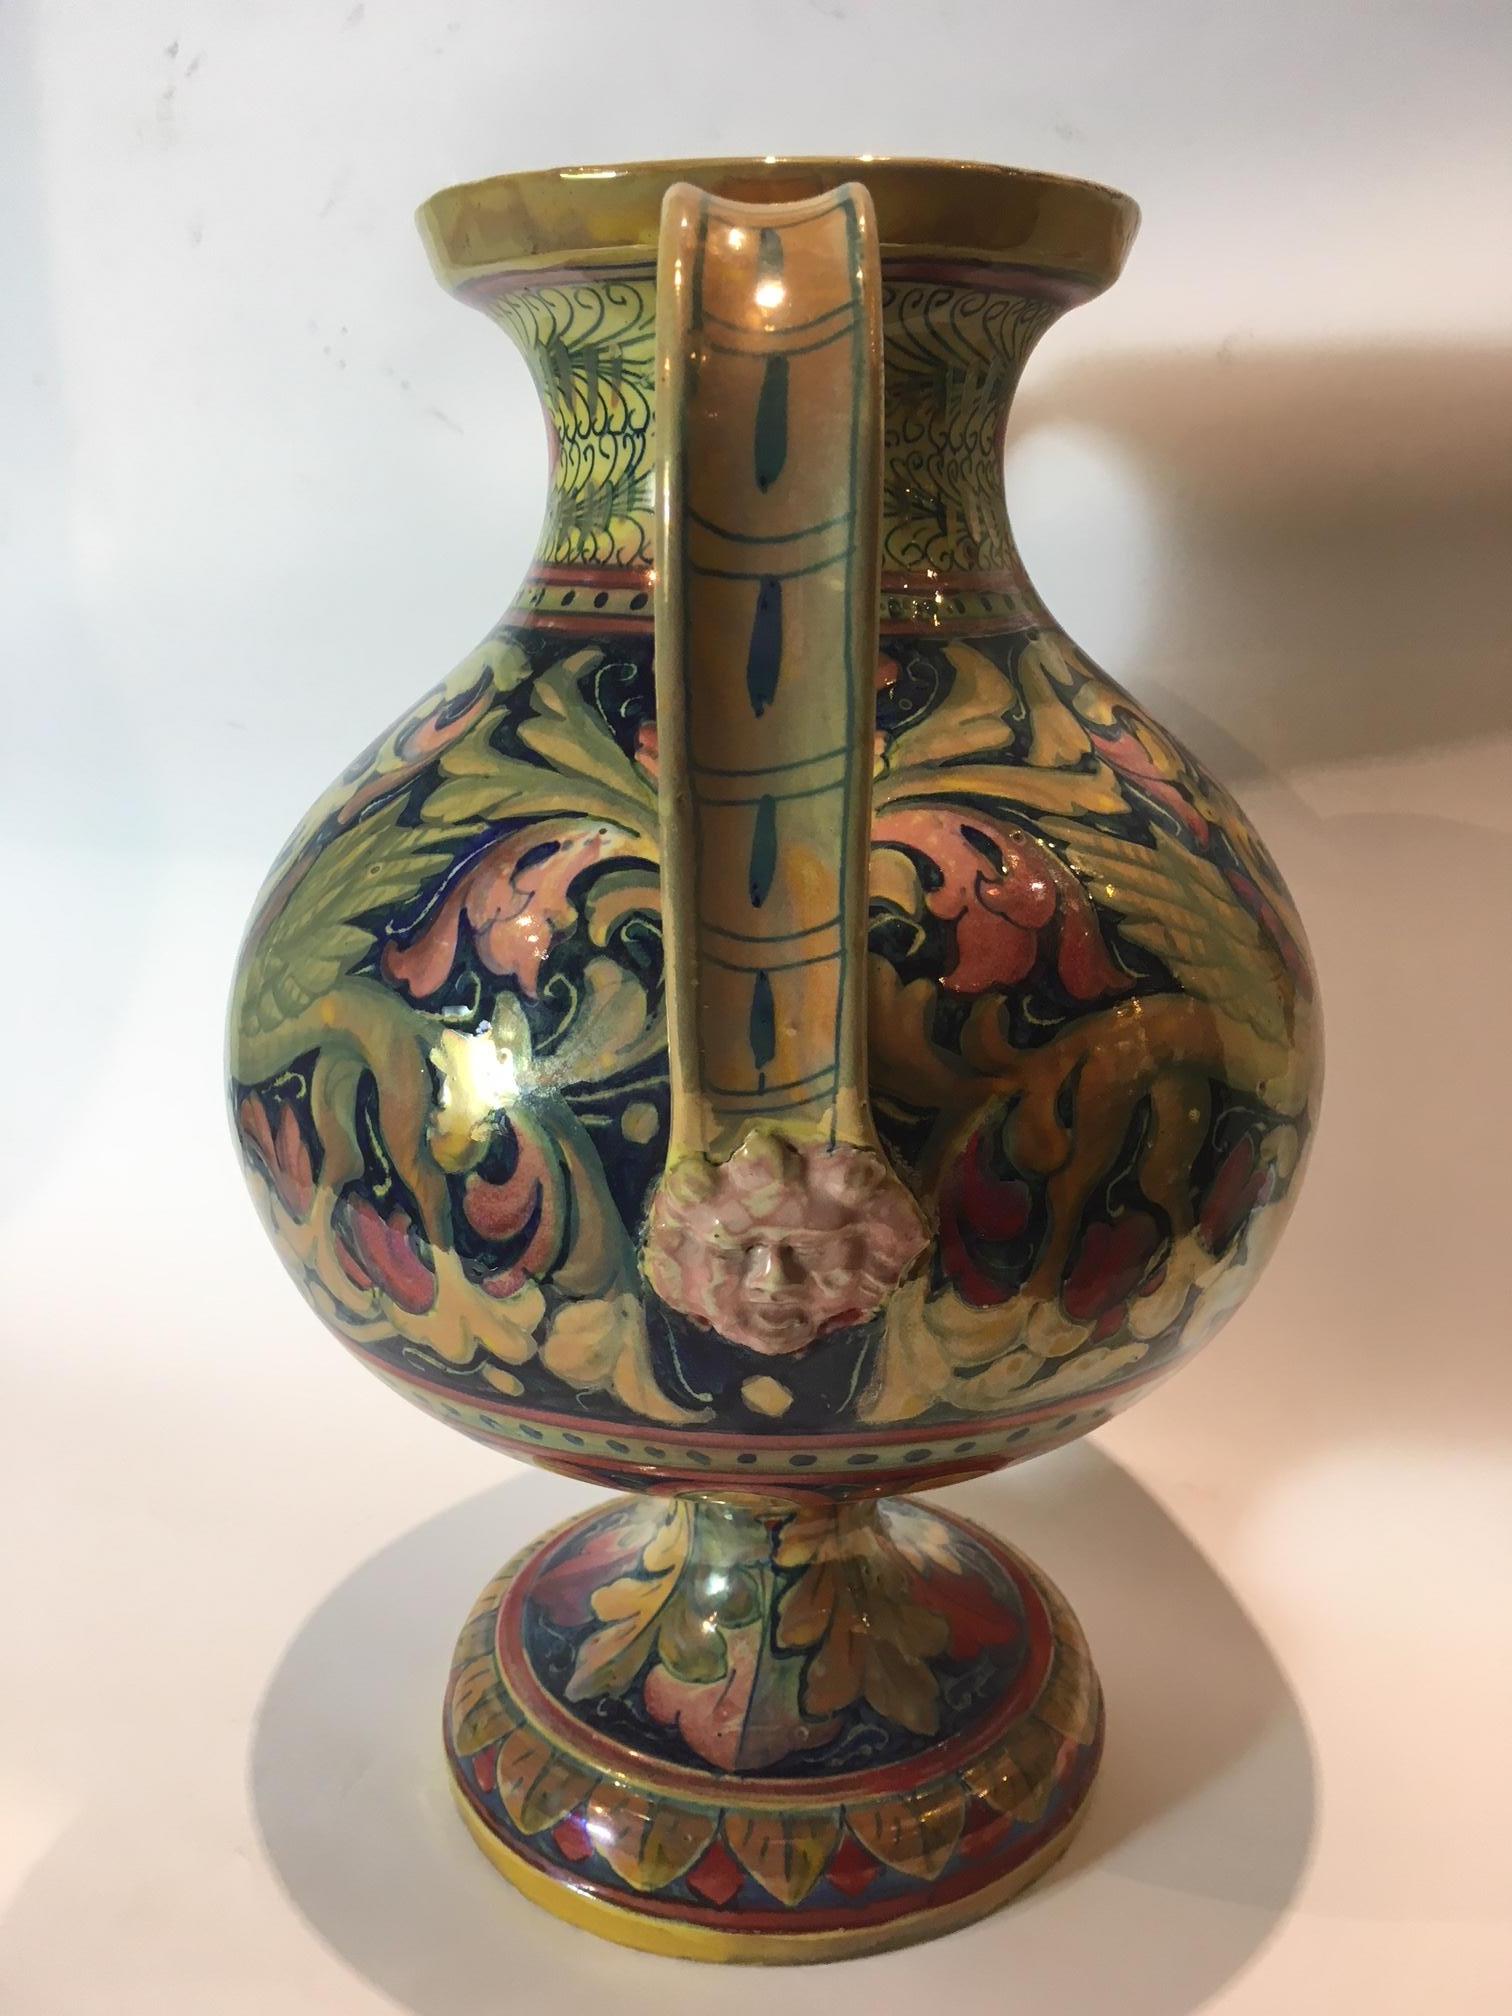 Stunning ceramic vase, Renaissance ornaments typical Gualdo Tadino manufacture, Central Italy town renowned for the Renaissance manufacture vases. Typical Amphora shape, large handles, it was used for holding water. Flower arrangements, dragons on